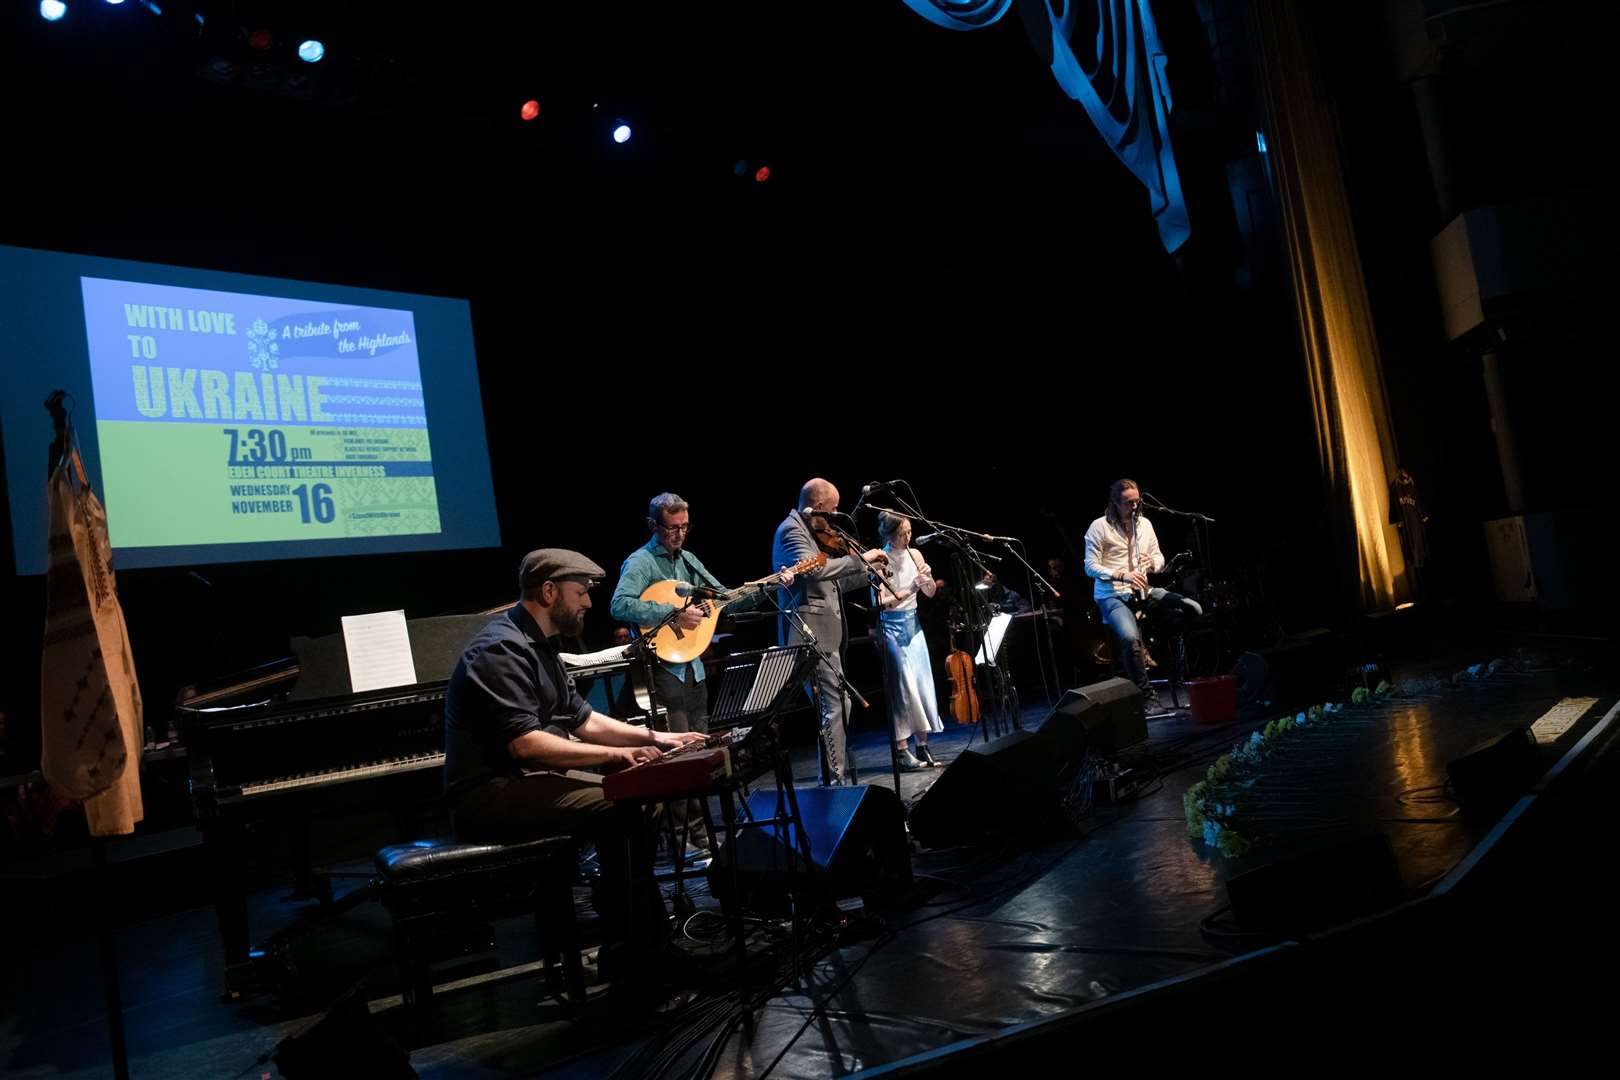 One of the moving pieces played by – from left – Hamish Napier, Eamon Doorley, Duncan Chisholm, Julie Fowlis and Ross Ainslie – just before the interval was their version of Runrig's Hearts Of Olden Glory. Picture: Callum Mackay